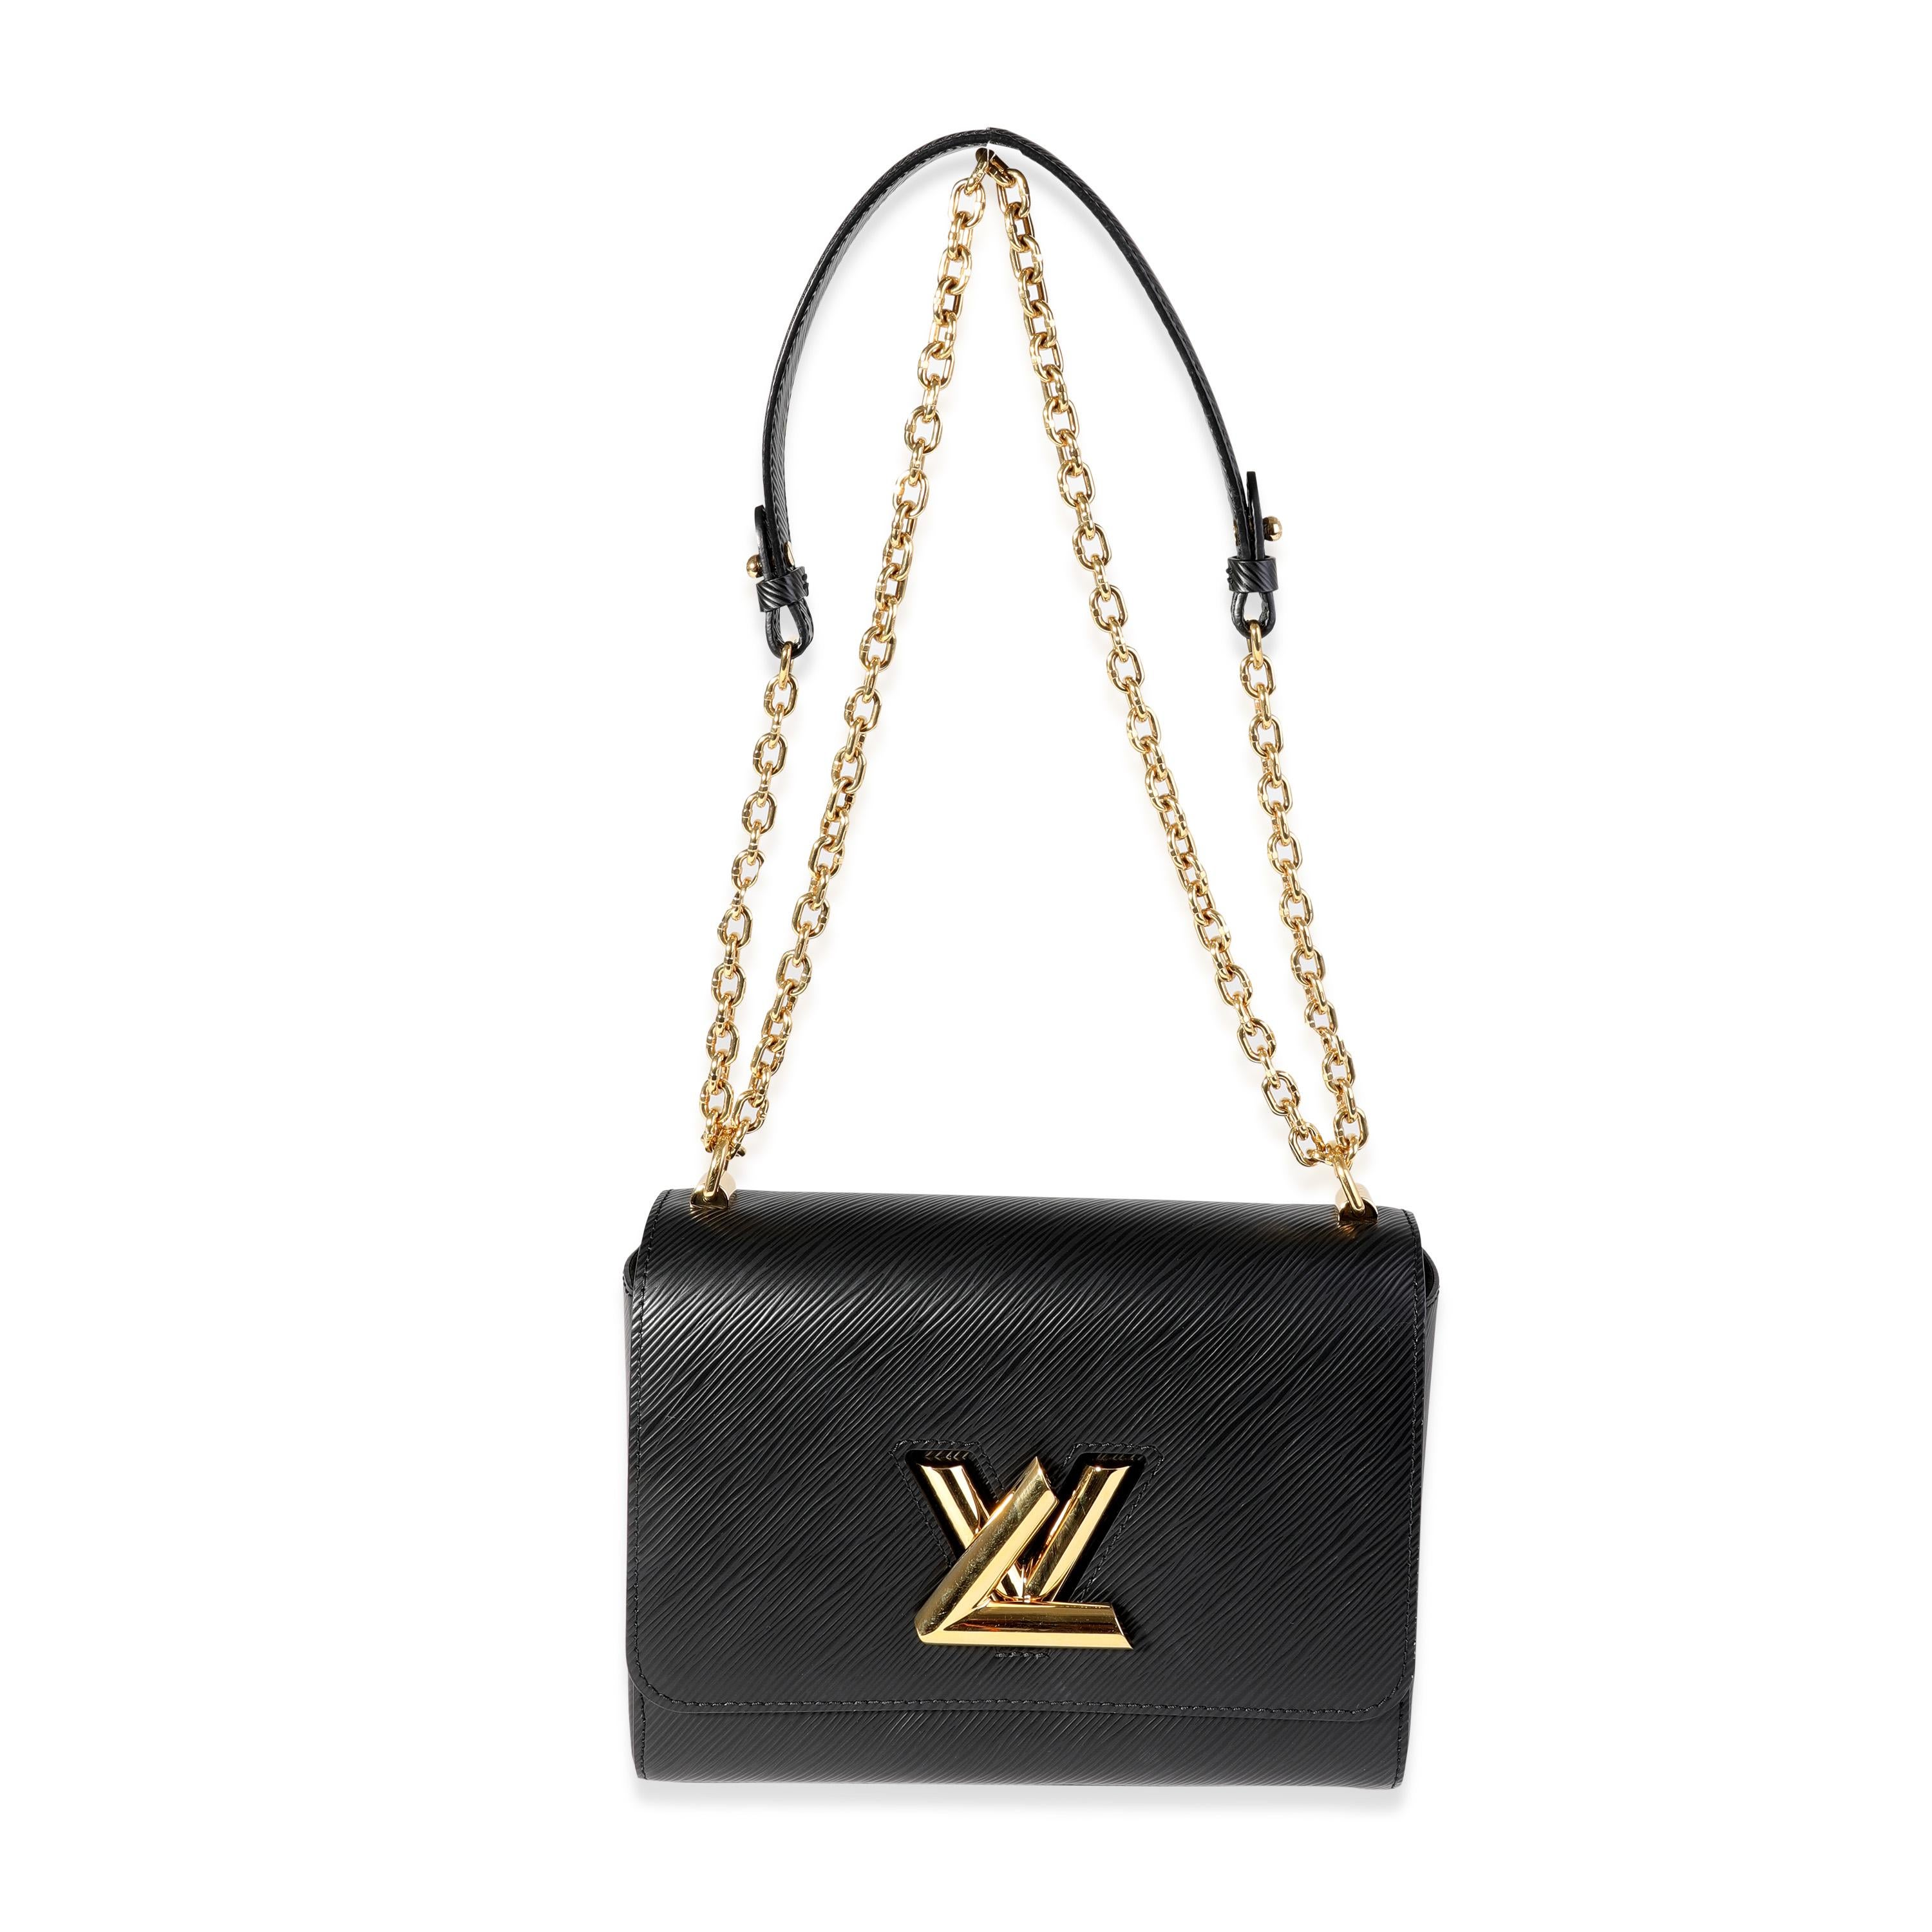 Listing Title: Louis Vuitton Black Epi Leather Twist MM

SKU: 120429
MSRP: 4700.00
Condition: Pre-owned
Handbag Condition: Very Good
Condition Comments: Very Good Condition. Scratching to hardware. Discoloration and light marks to interior